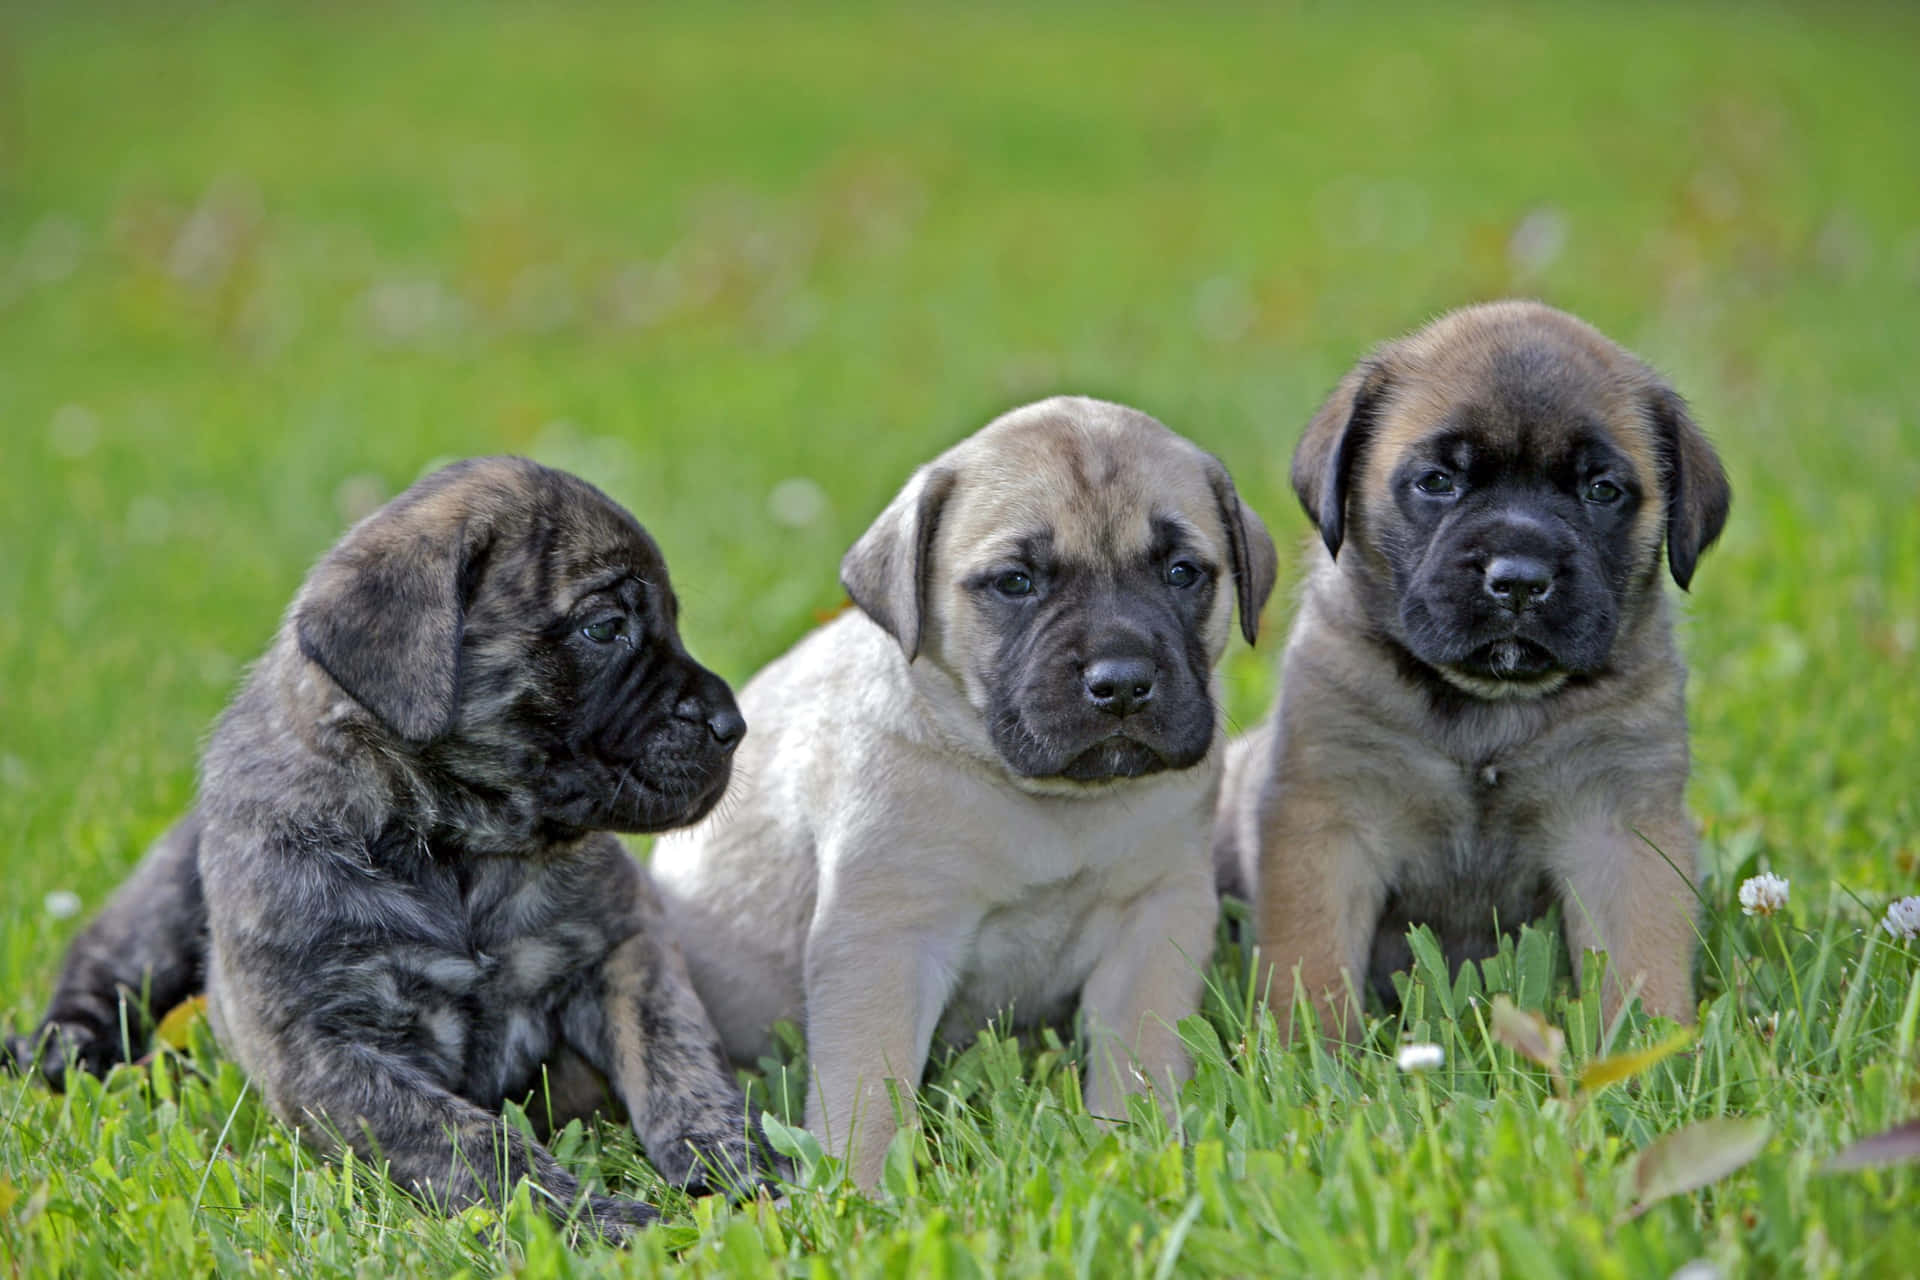 "Welcome to the World of the English Mastiff"